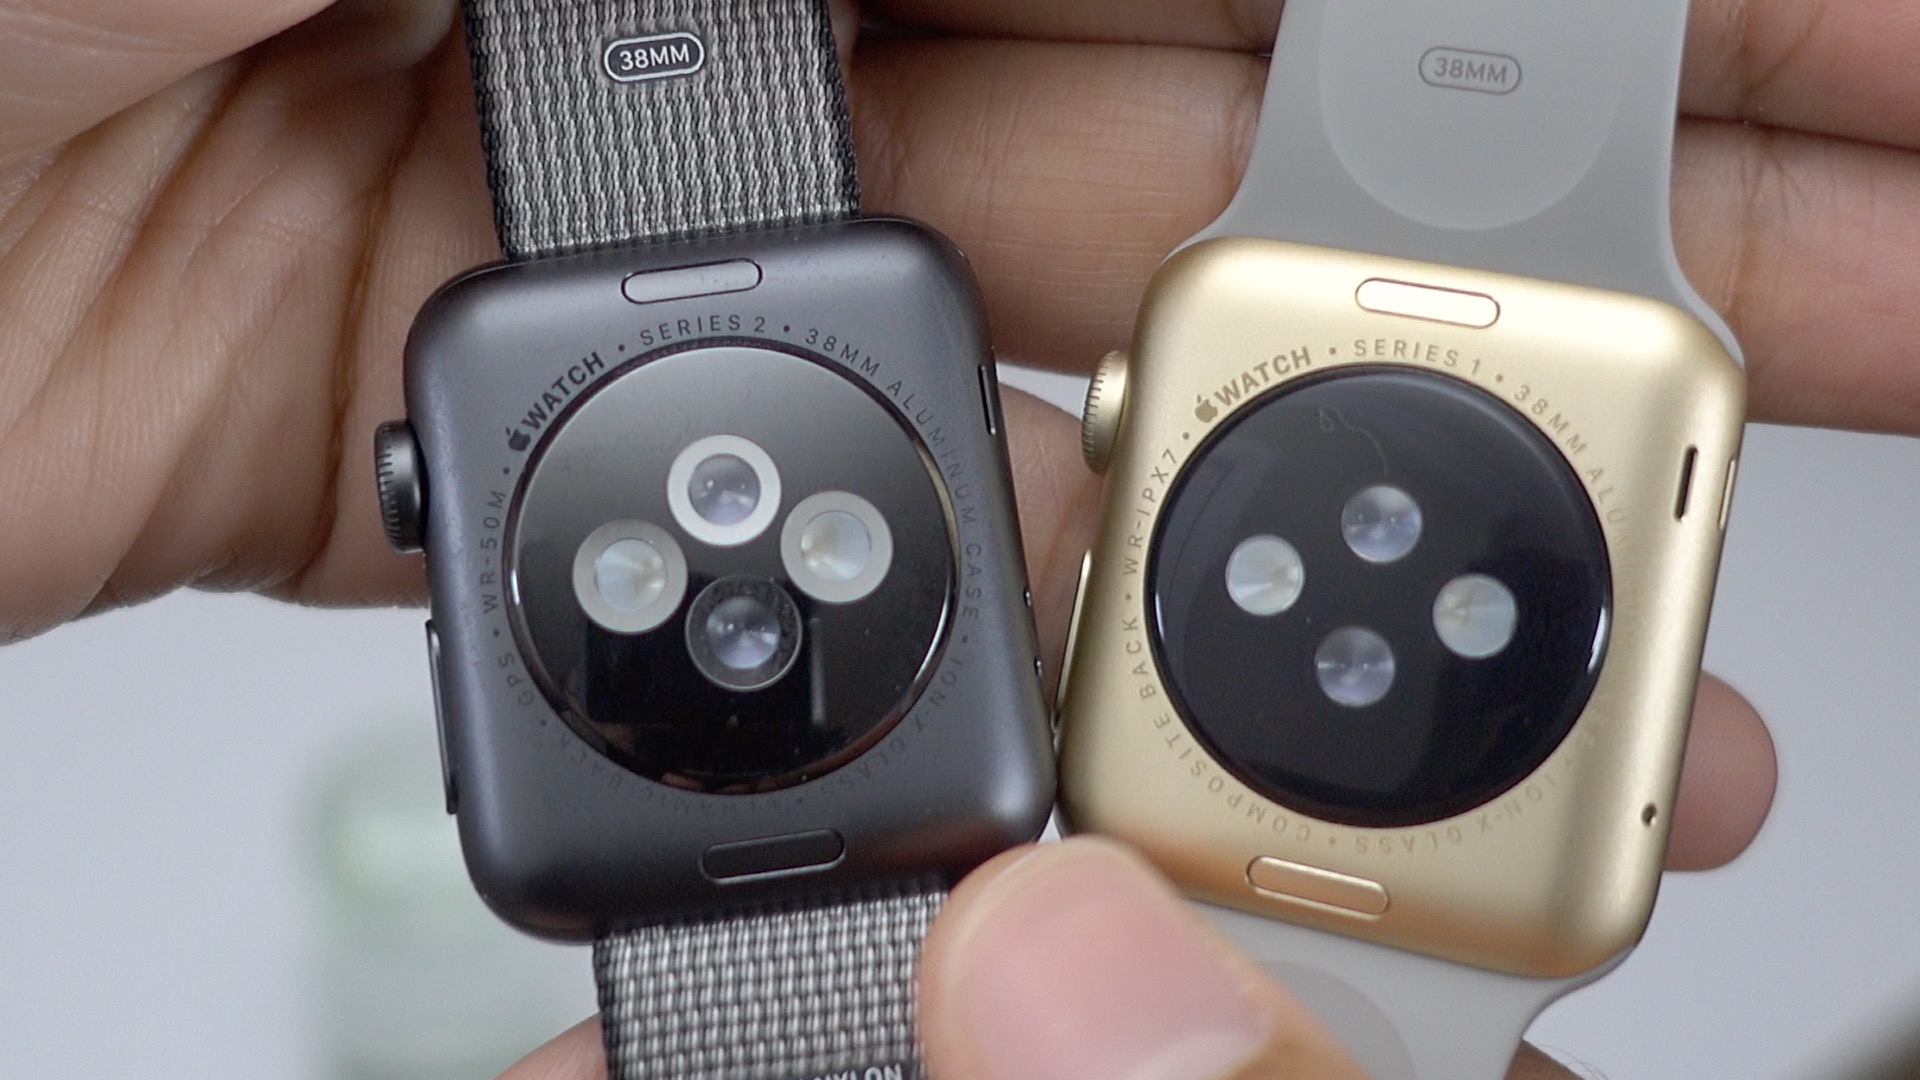 Top new Apple Watch Series 1 and Series 2 features - which one should